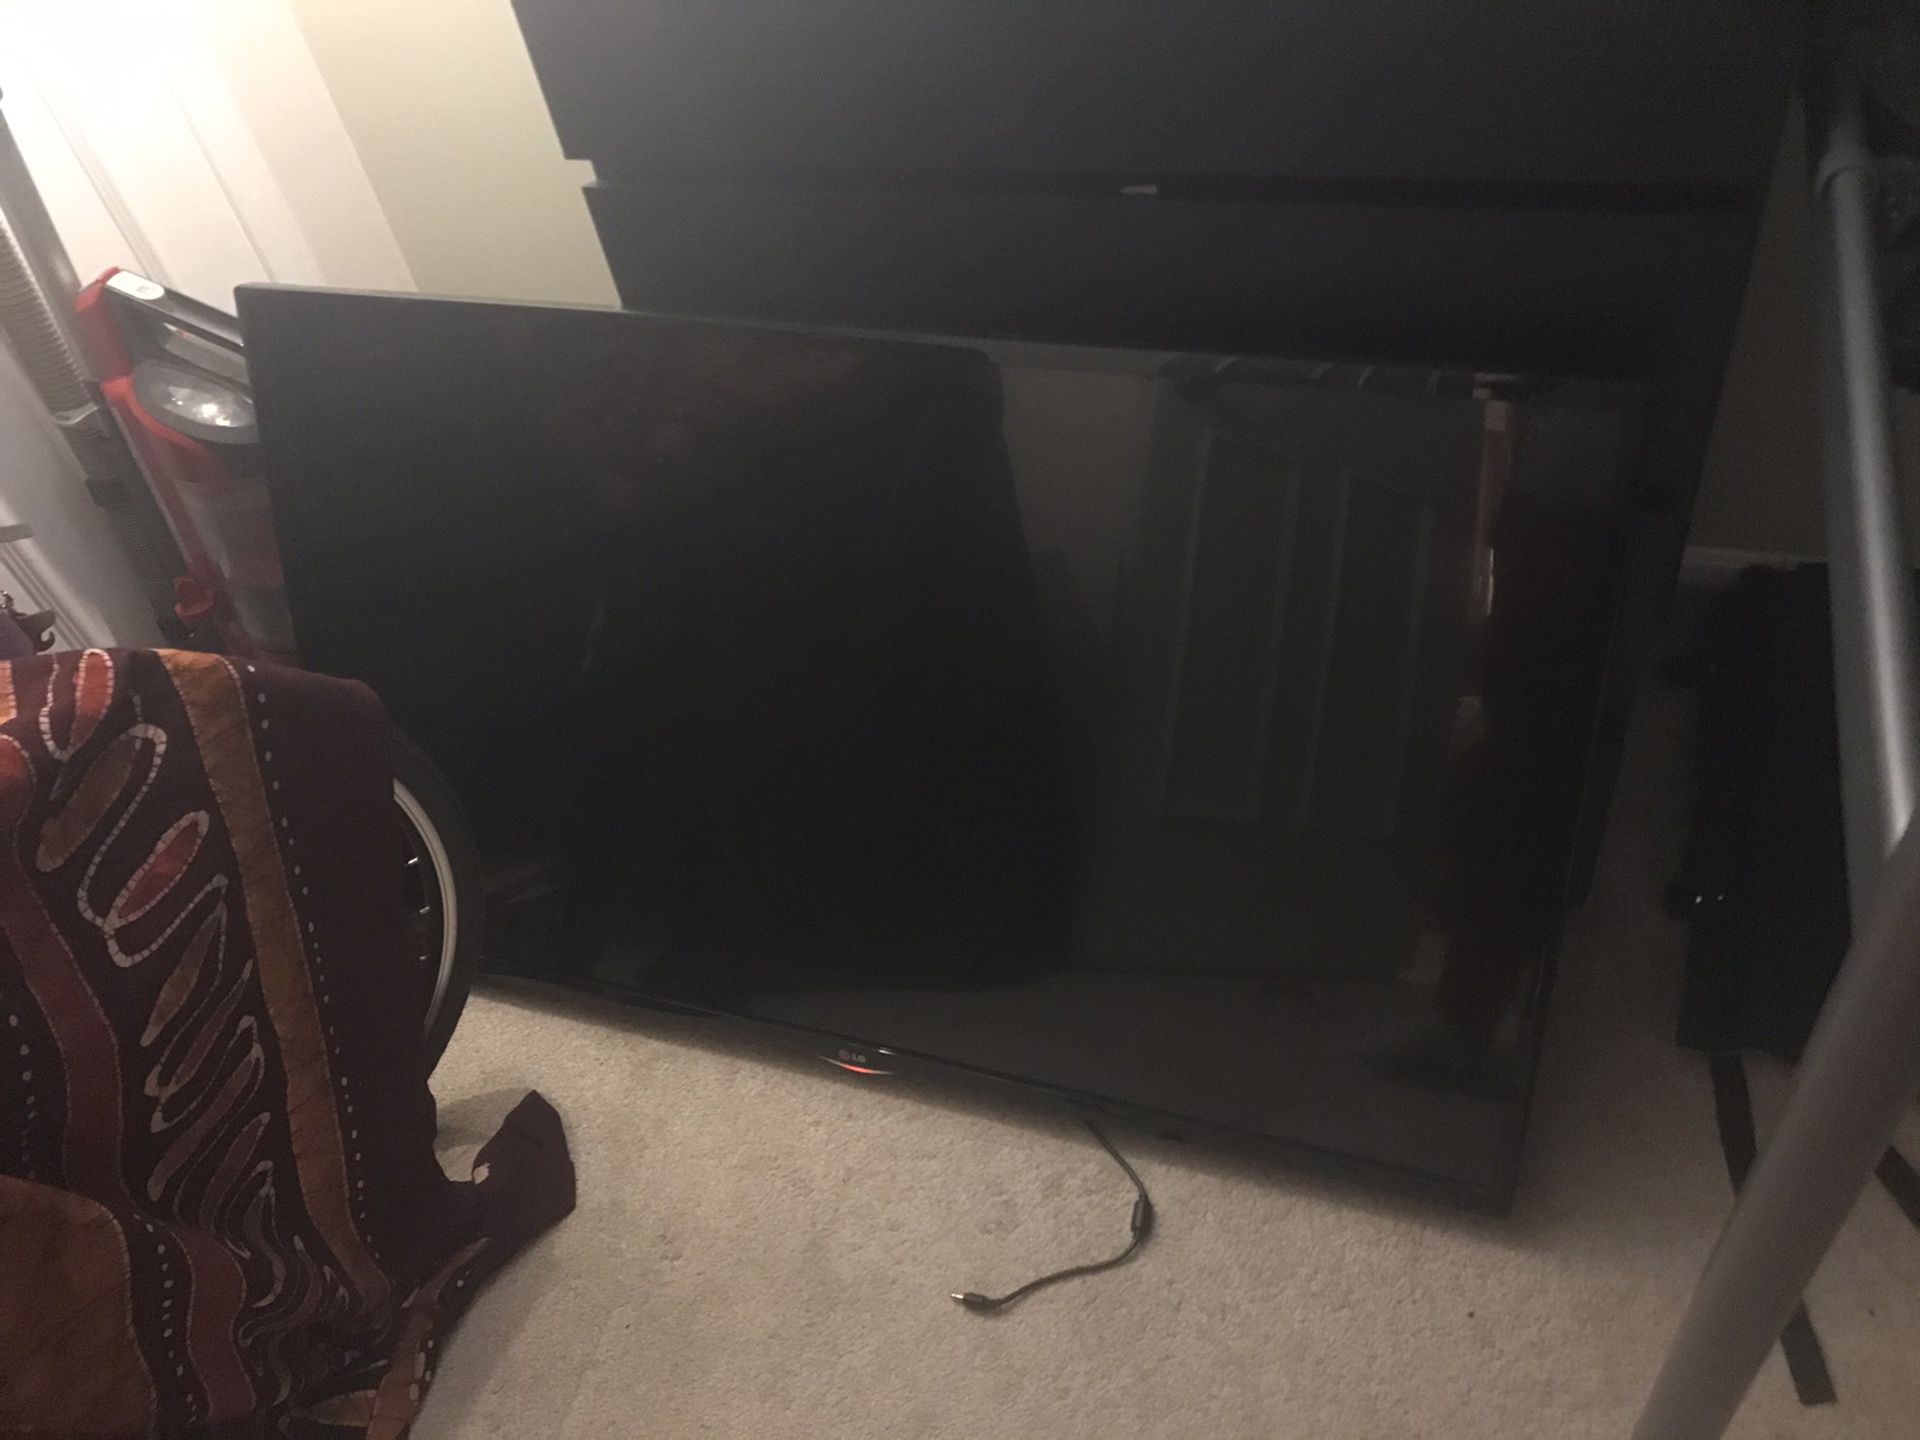 50 inch LG Plasma Tv (has red light but turns off)